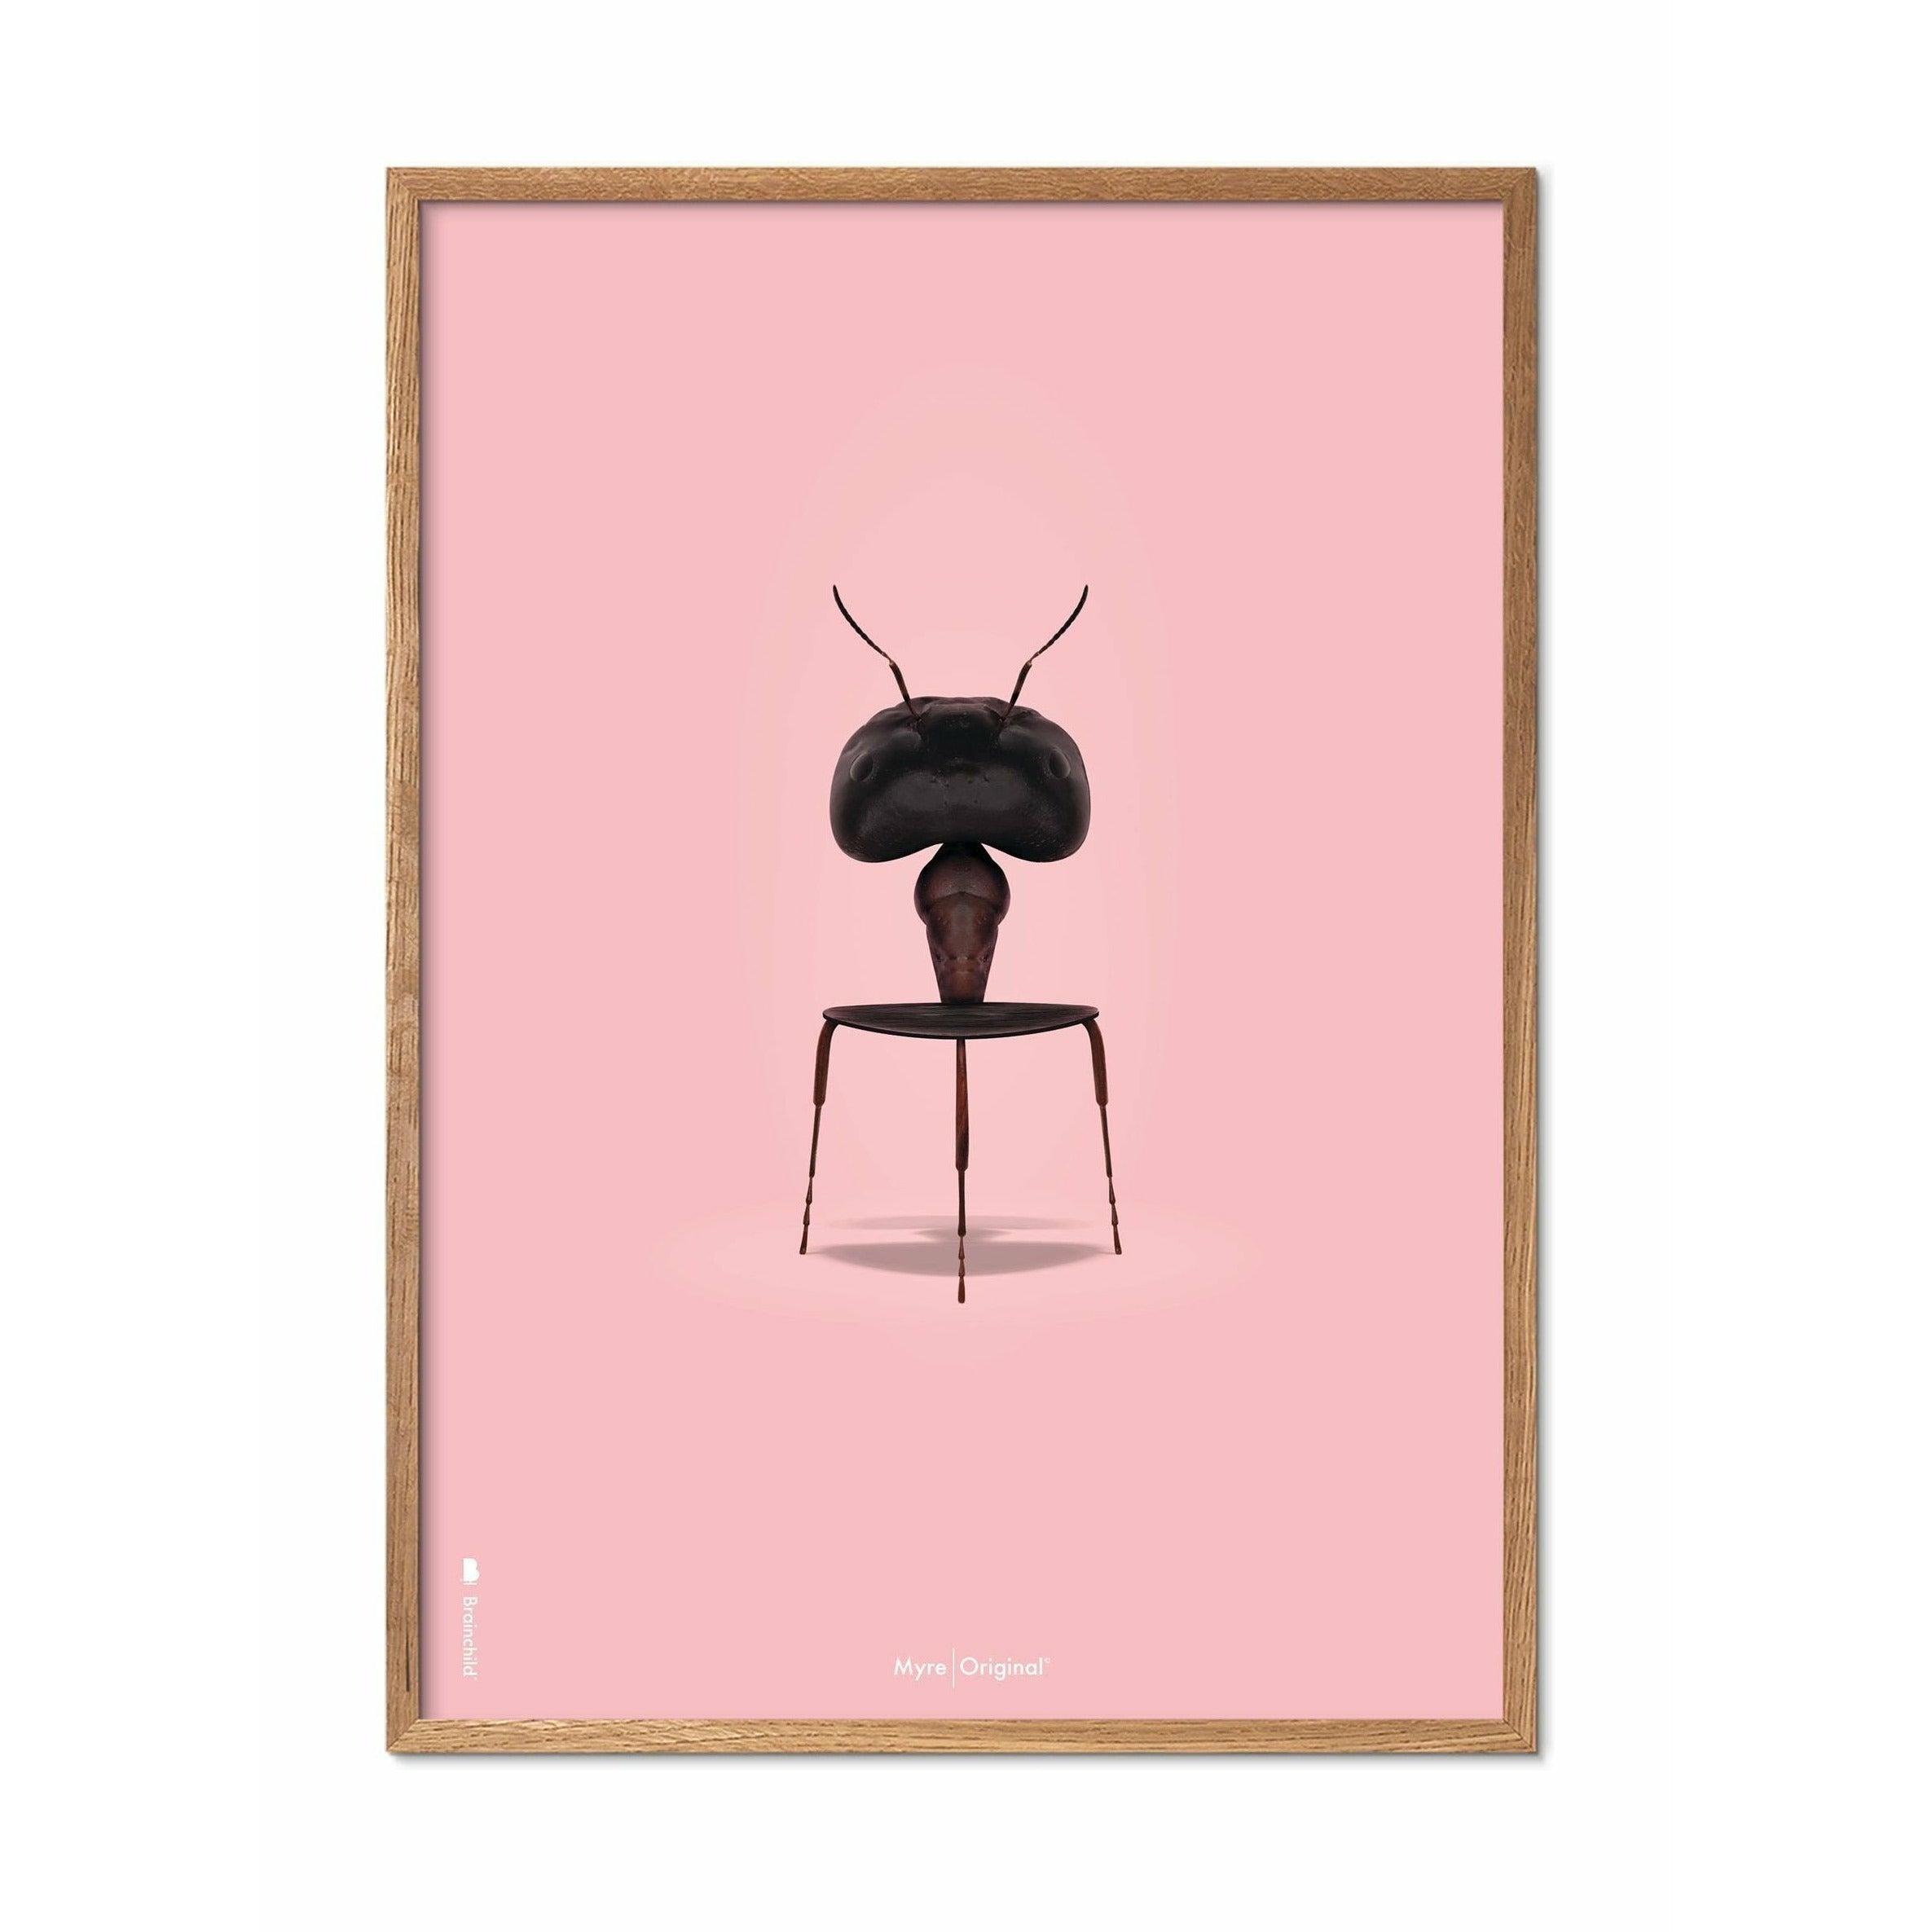 Brainchild Ant Classic Poster, Frame Made Of Light Wood 30x40 Cm, Pink Background